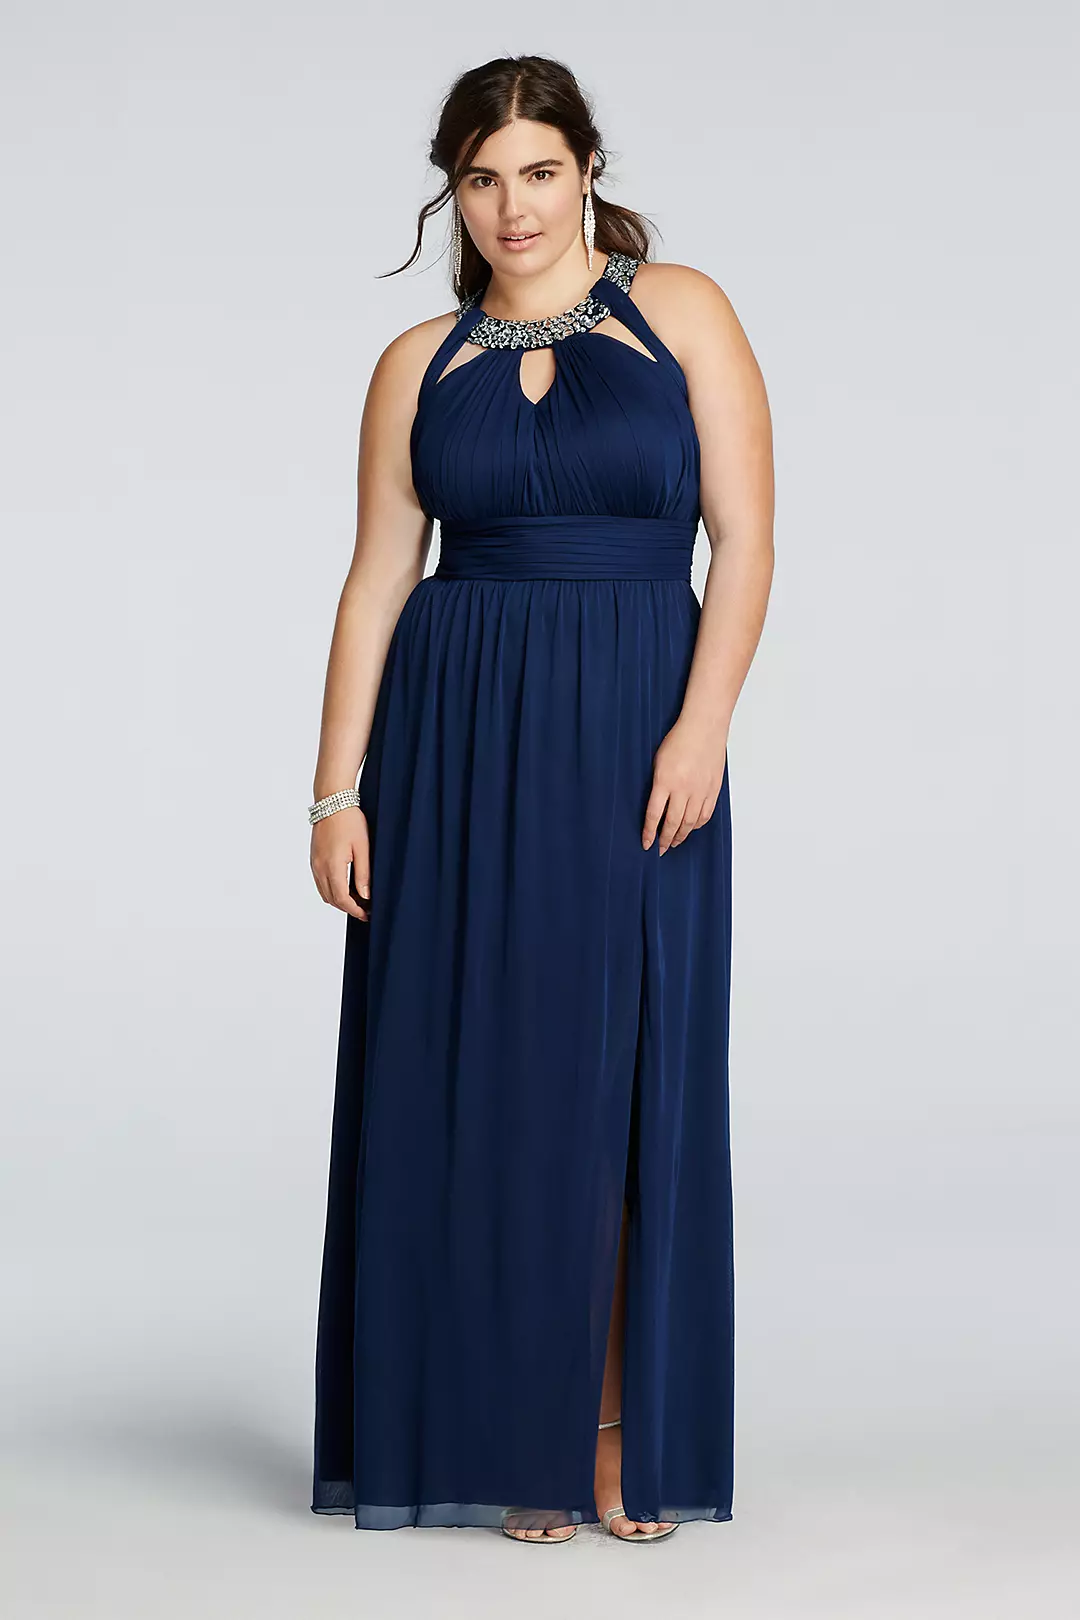 Beaded Halter Plus Size Prom Dress with Cut Outs Image